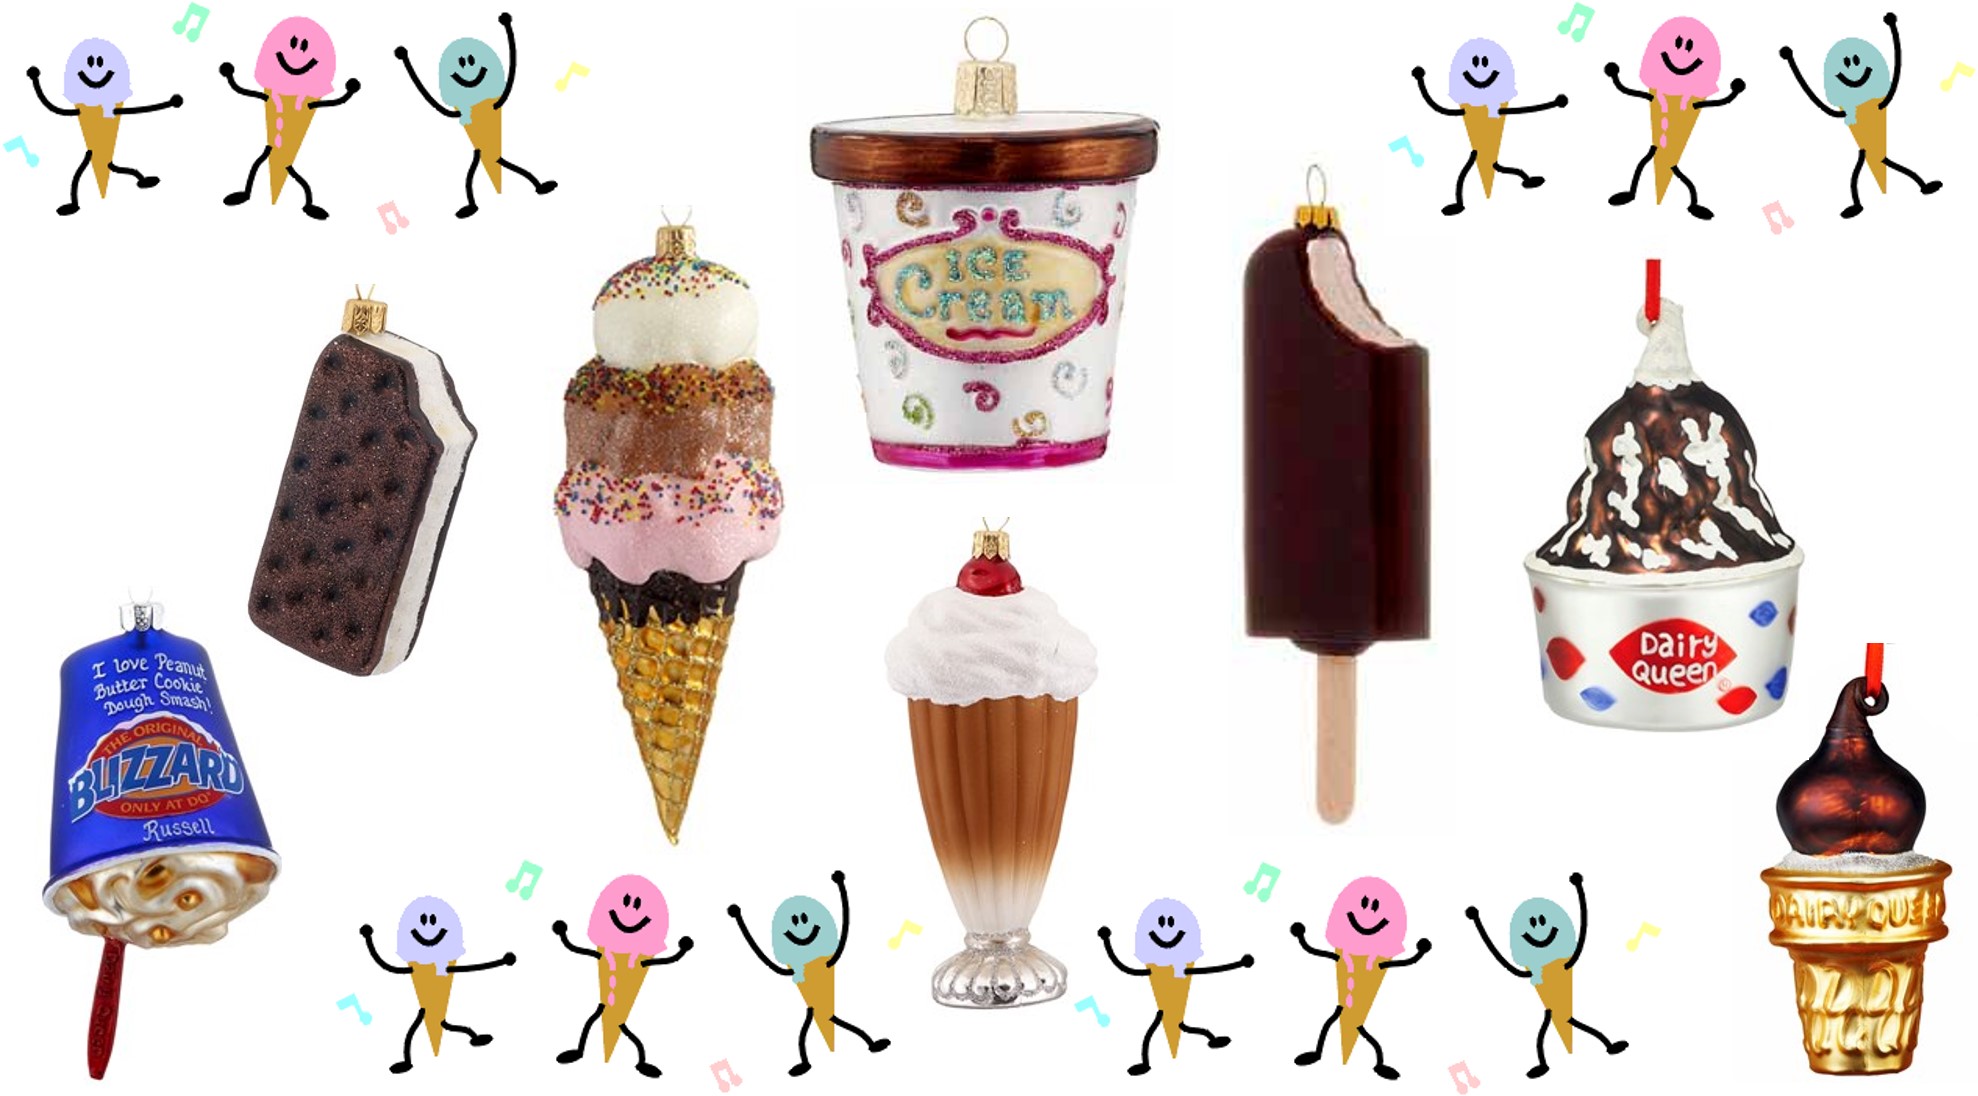 Ice Cream Ornaments available at OrnamentShop.com including a tub of ice cream, a chocolate ice cream bar, and a Blizzard from Dairy Queen. | OrnamentShop.com